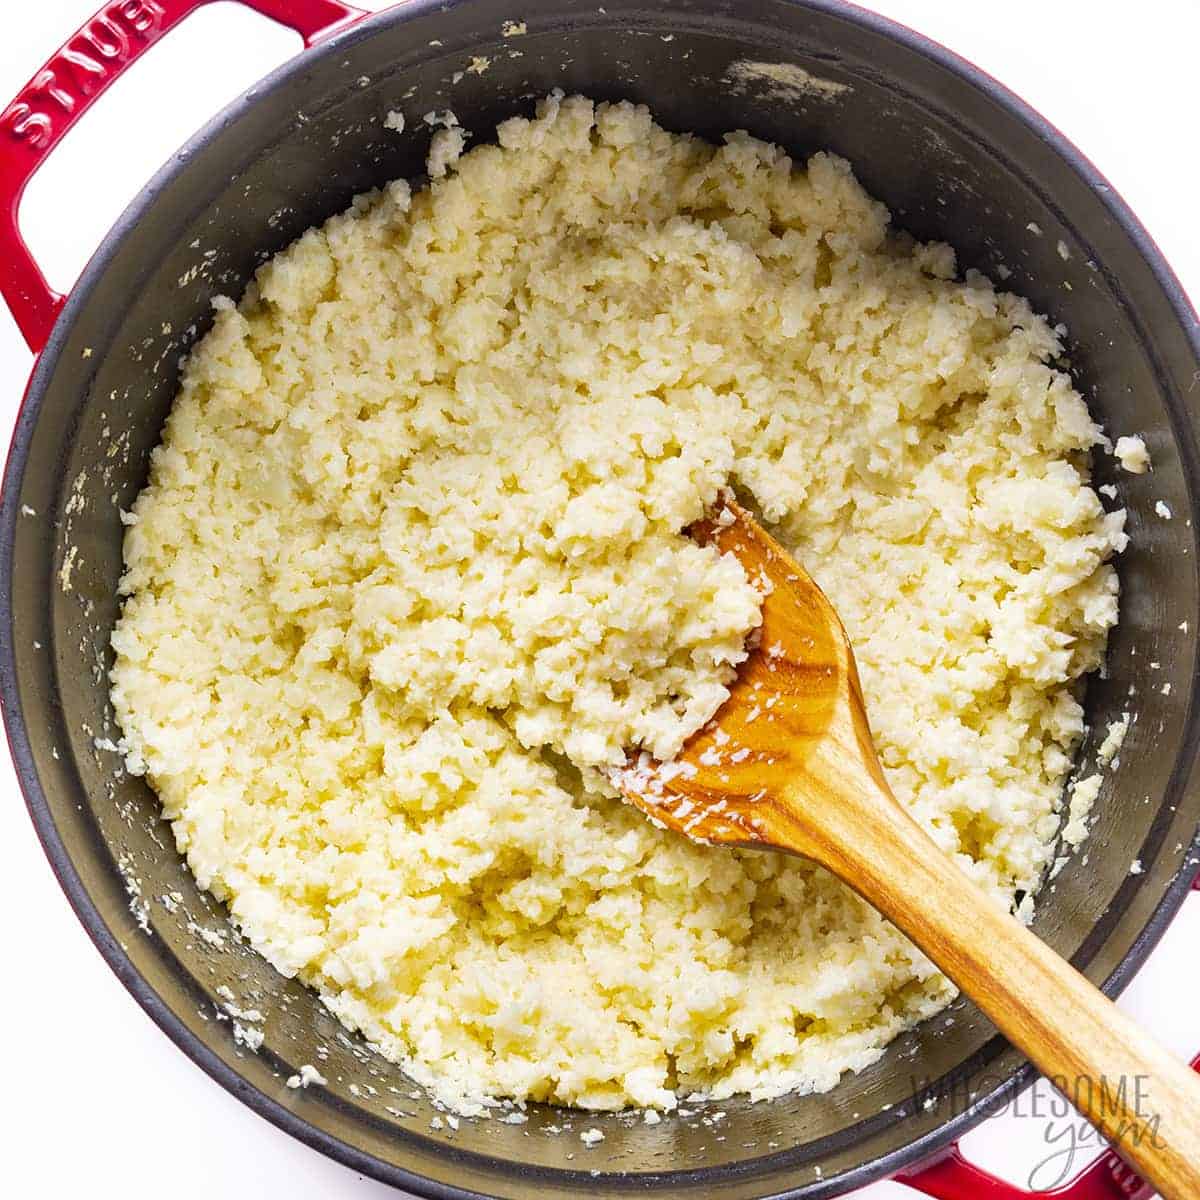 Low carb grits with cheese mixed in